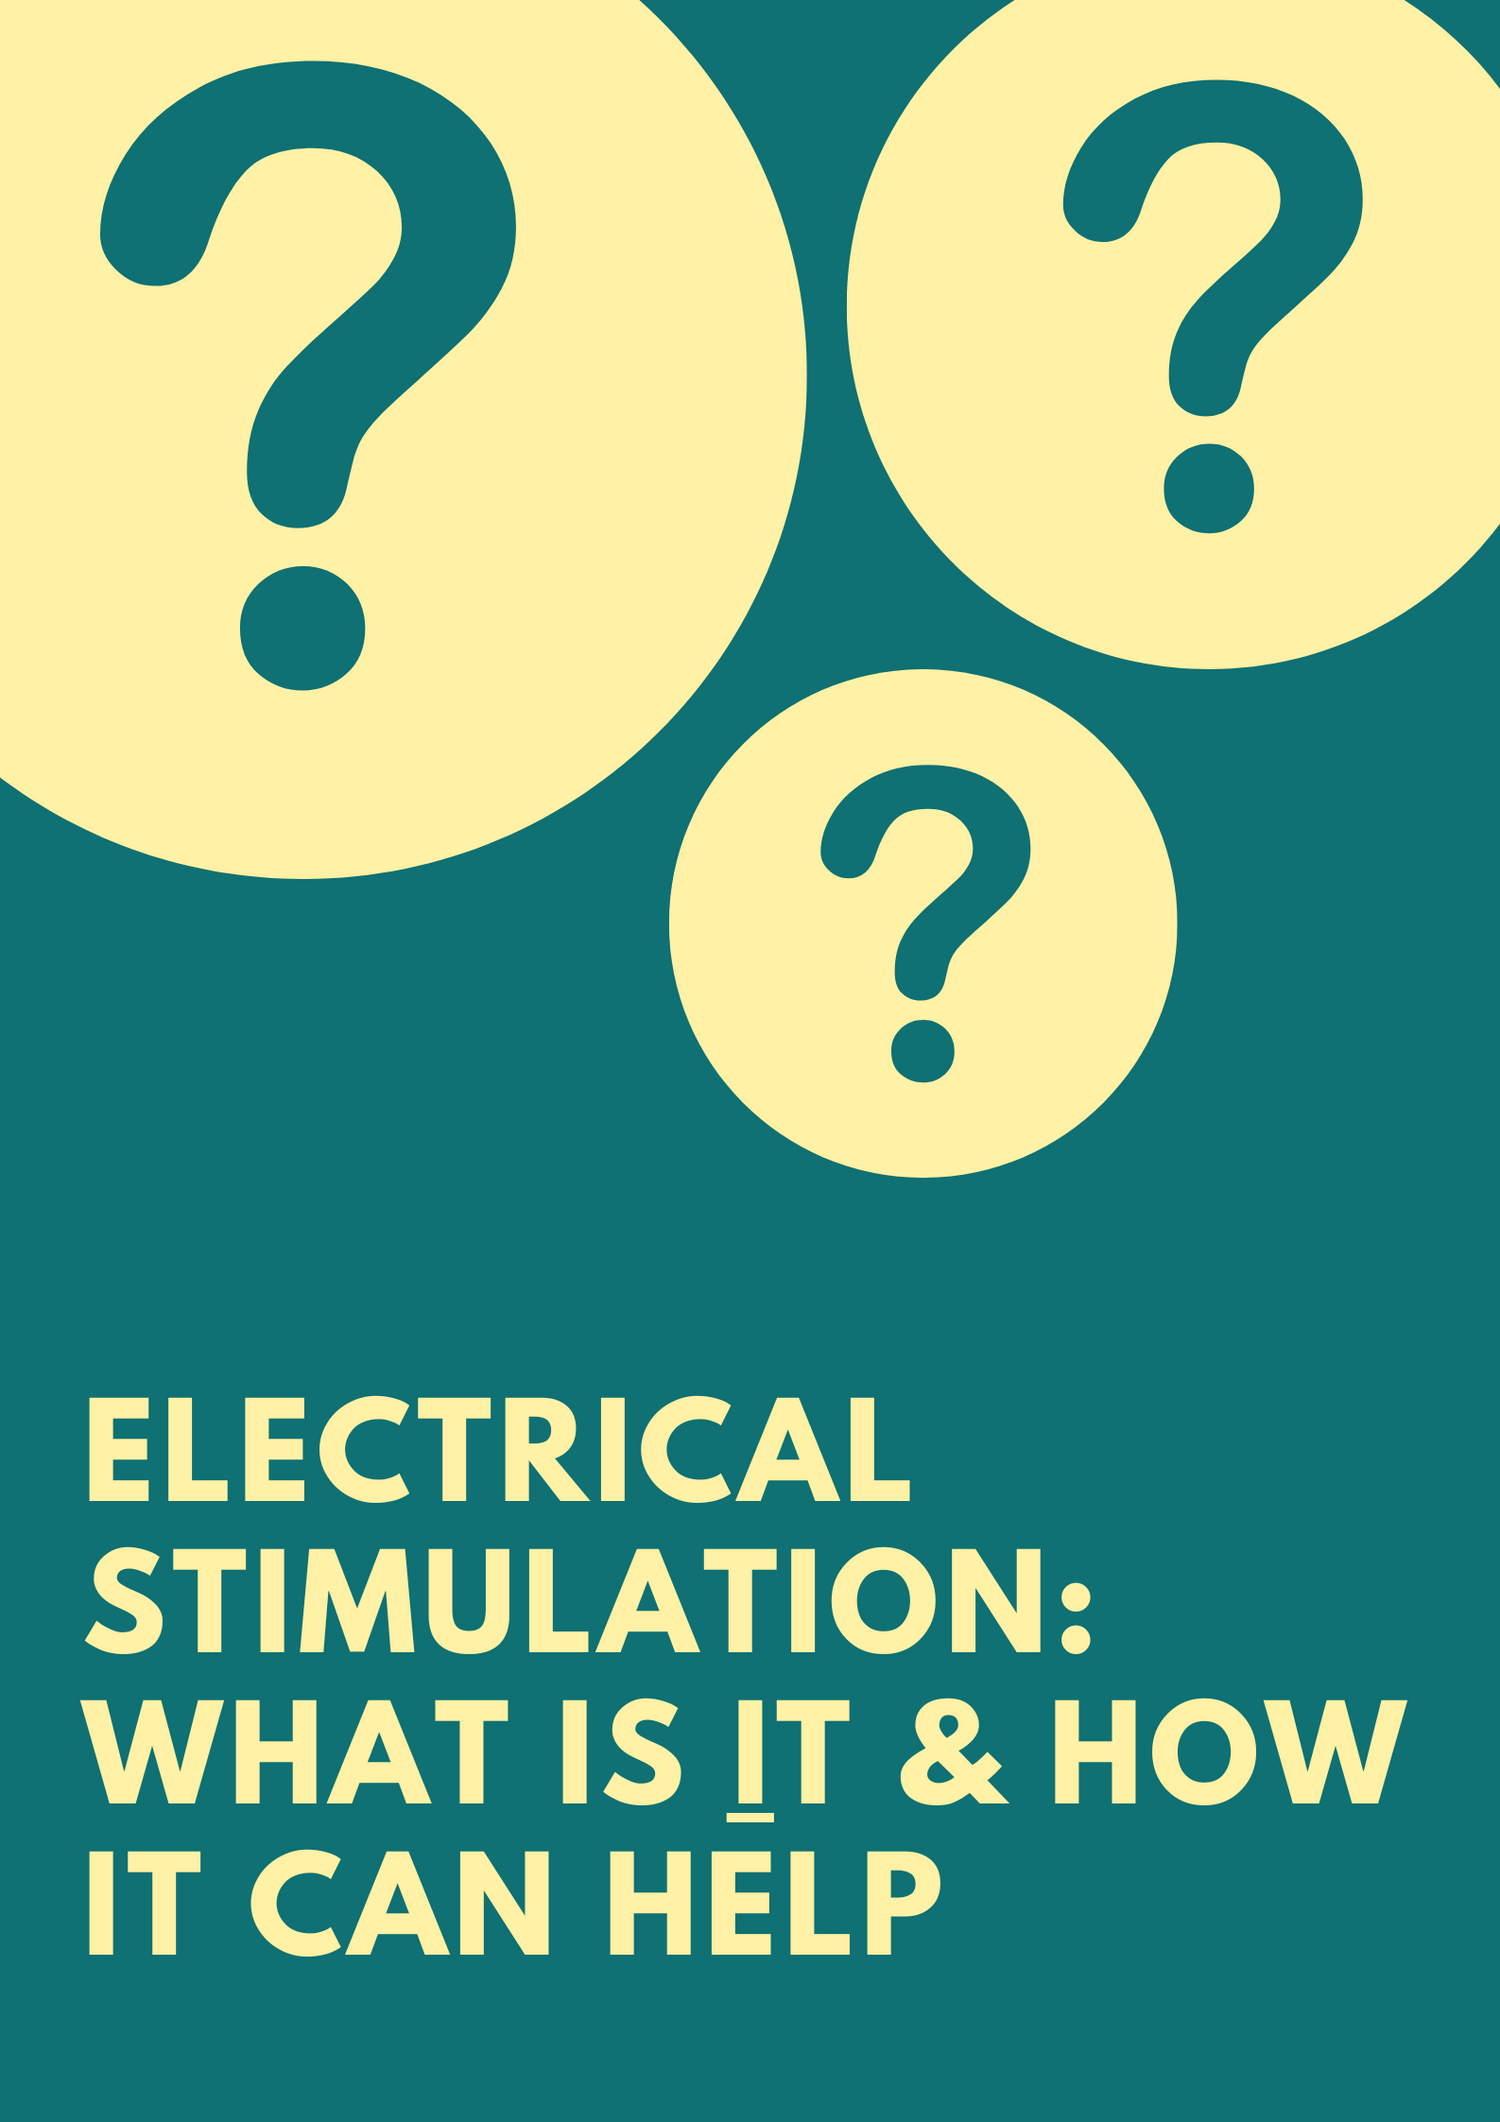 ELECTRICAL STIMULATION: What Is It & How It Can Help